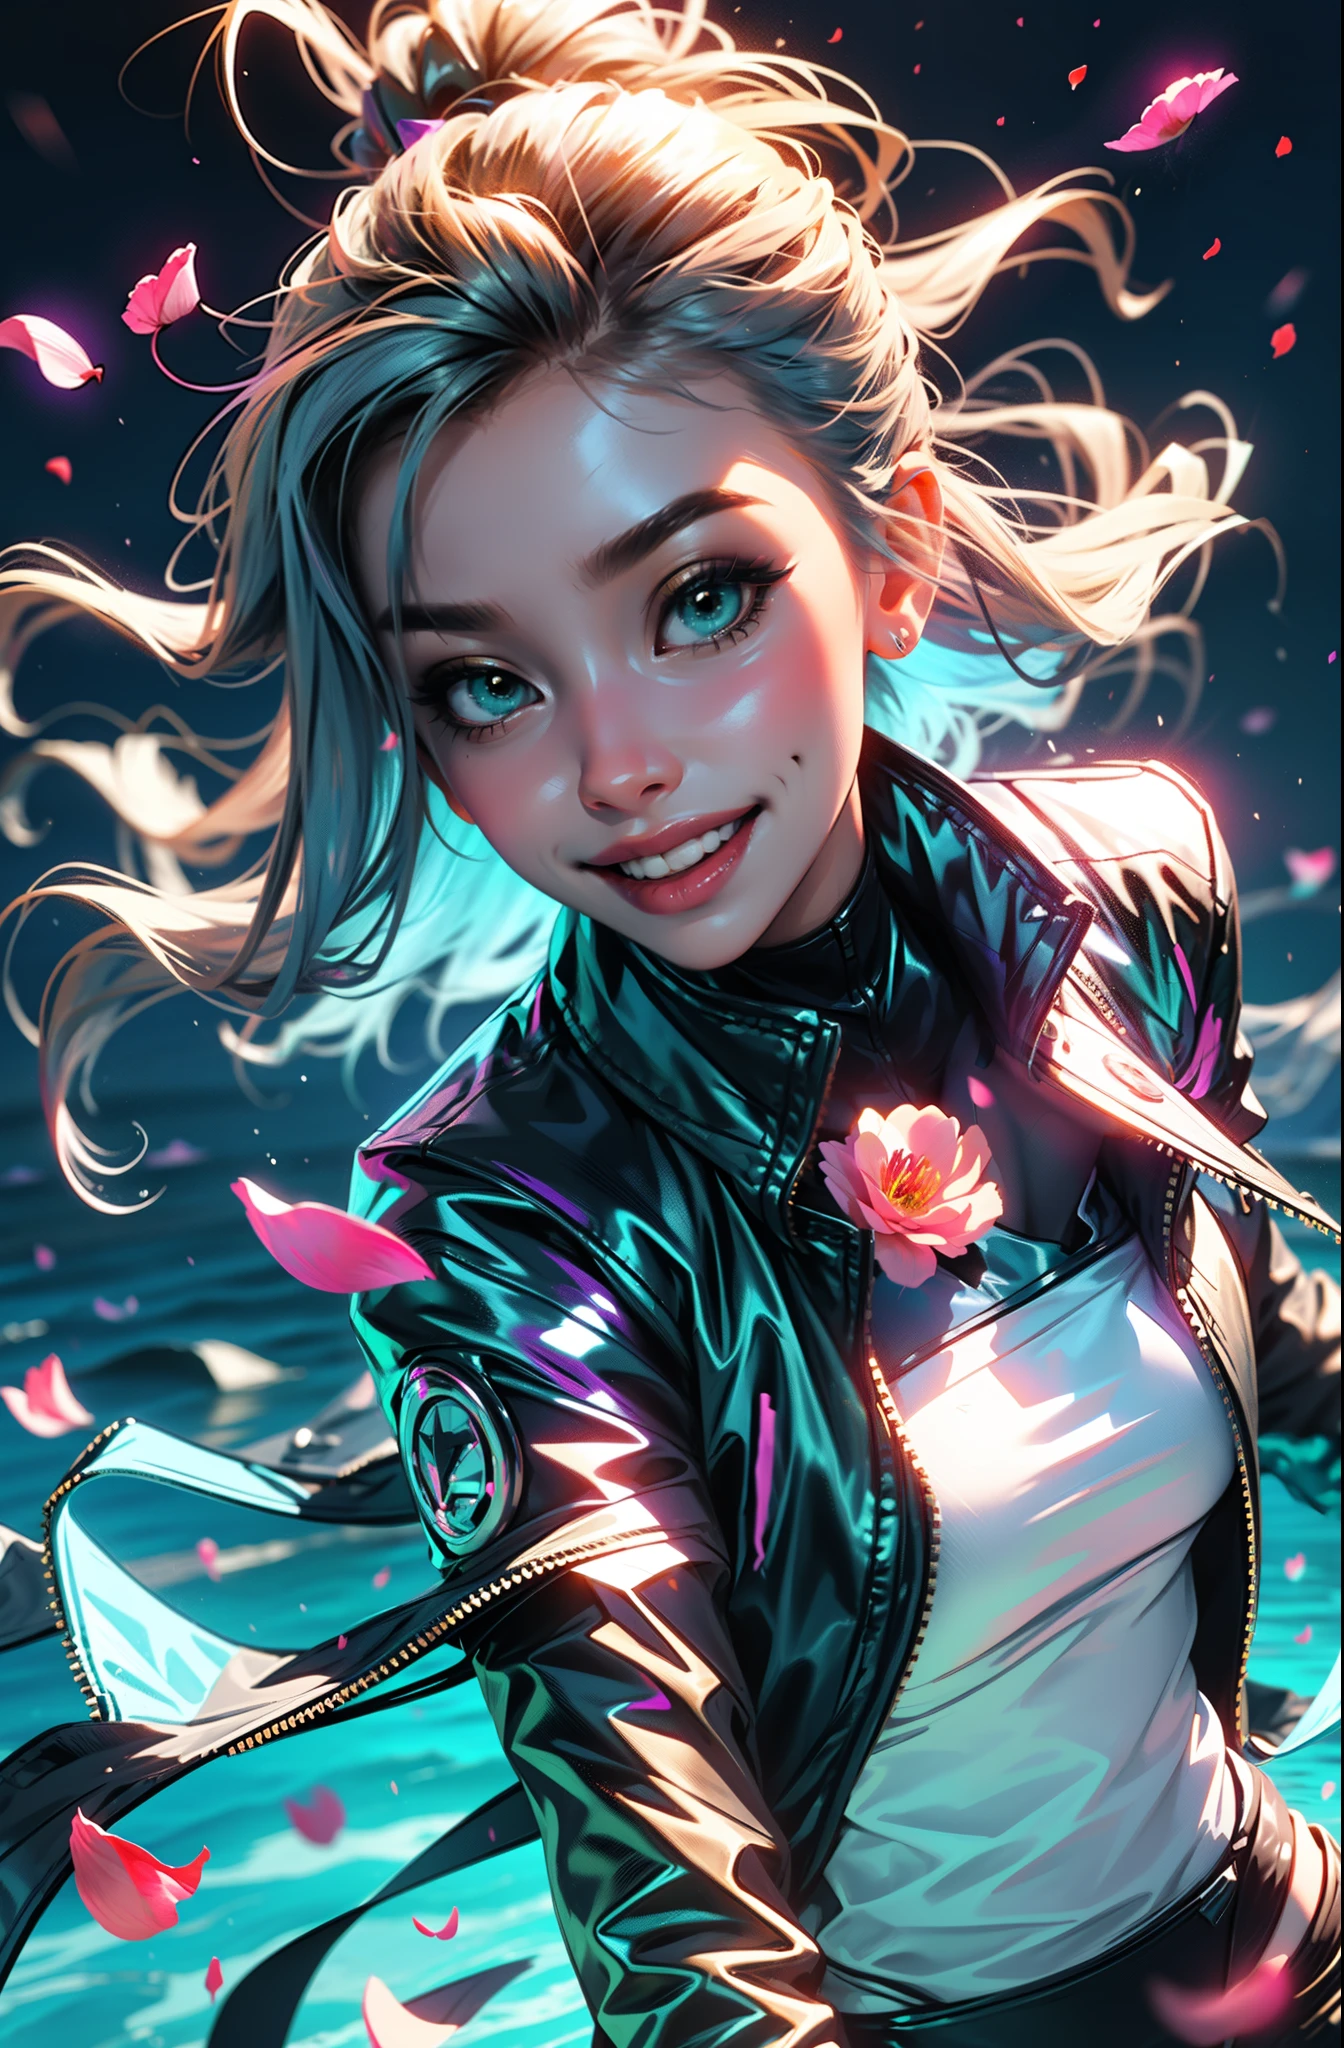 cyberpunk female woman wearing Denim Jacket with chromatic accents:1.1), sleek full bodysuit, (Petal Blush, Lagoon Blue color background:1.3), amazing smile, looking at camera, golden hour